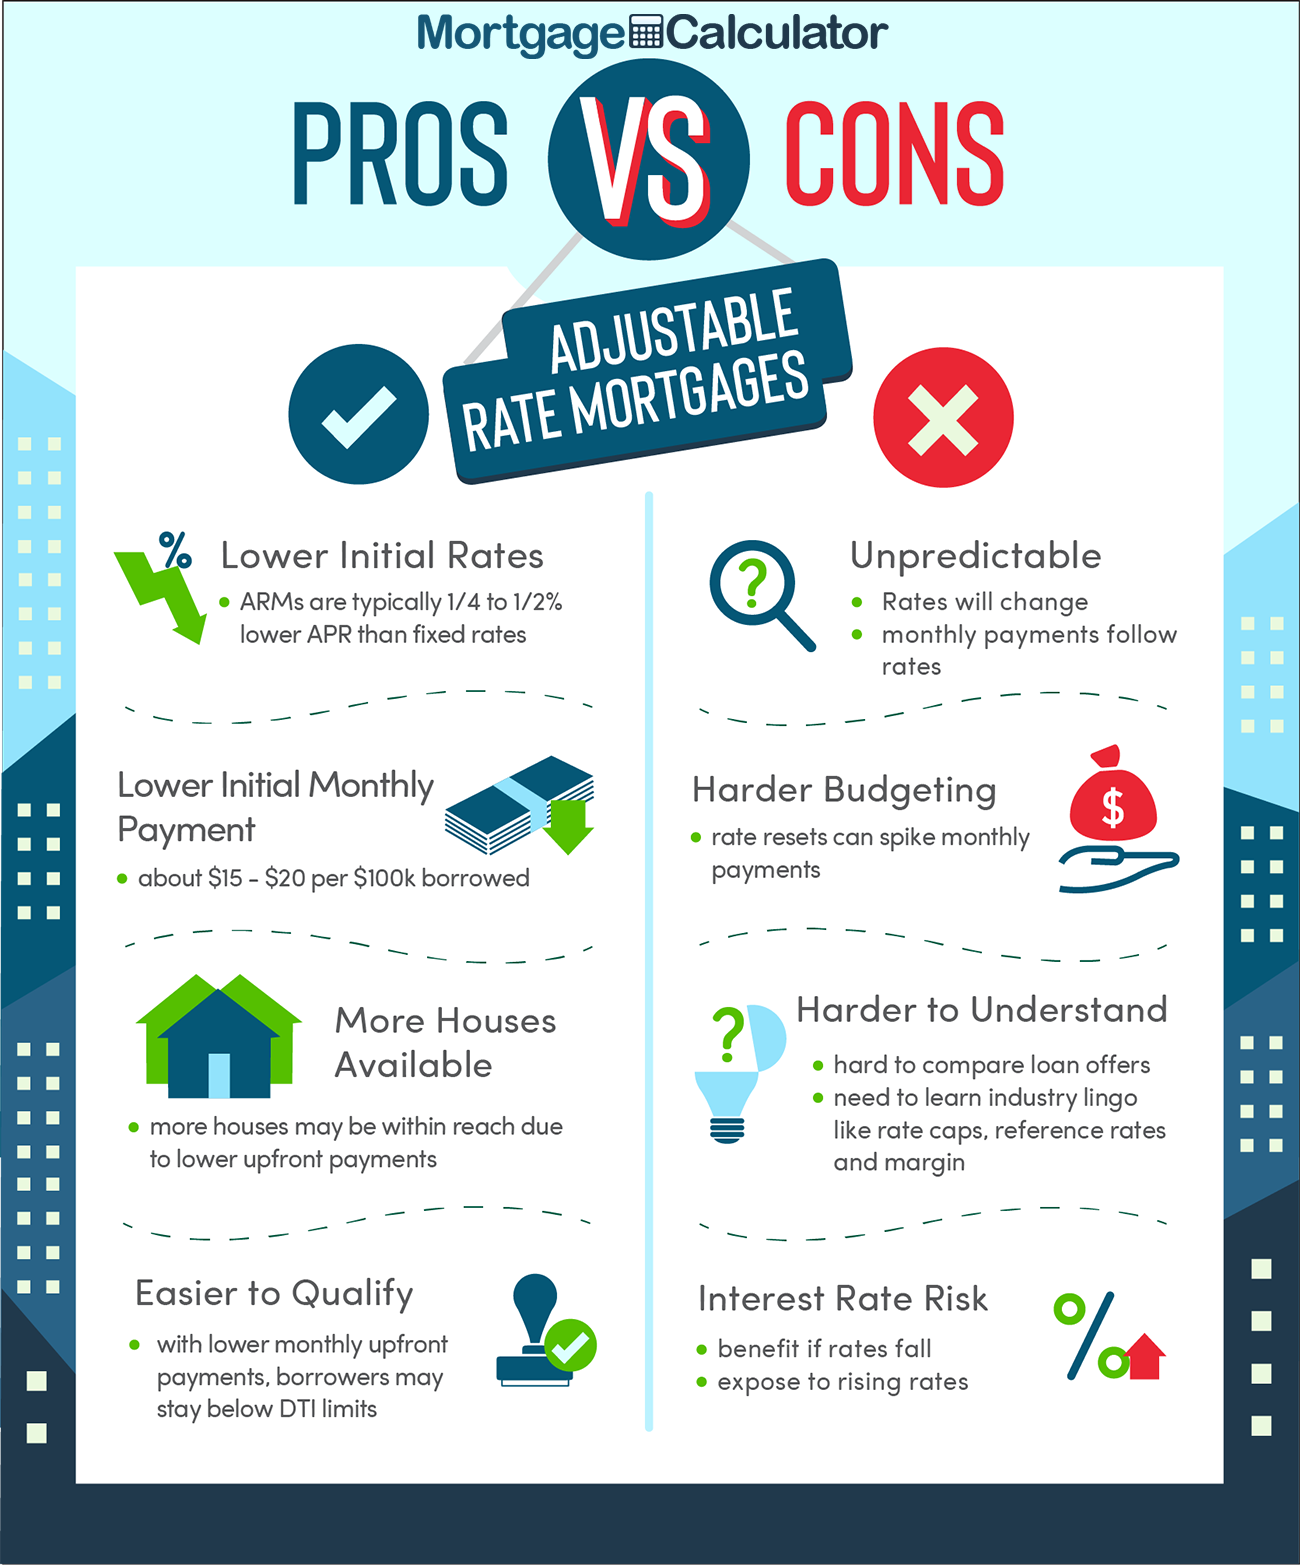 Pros and Cons of Adjustable Rate Mortgages.